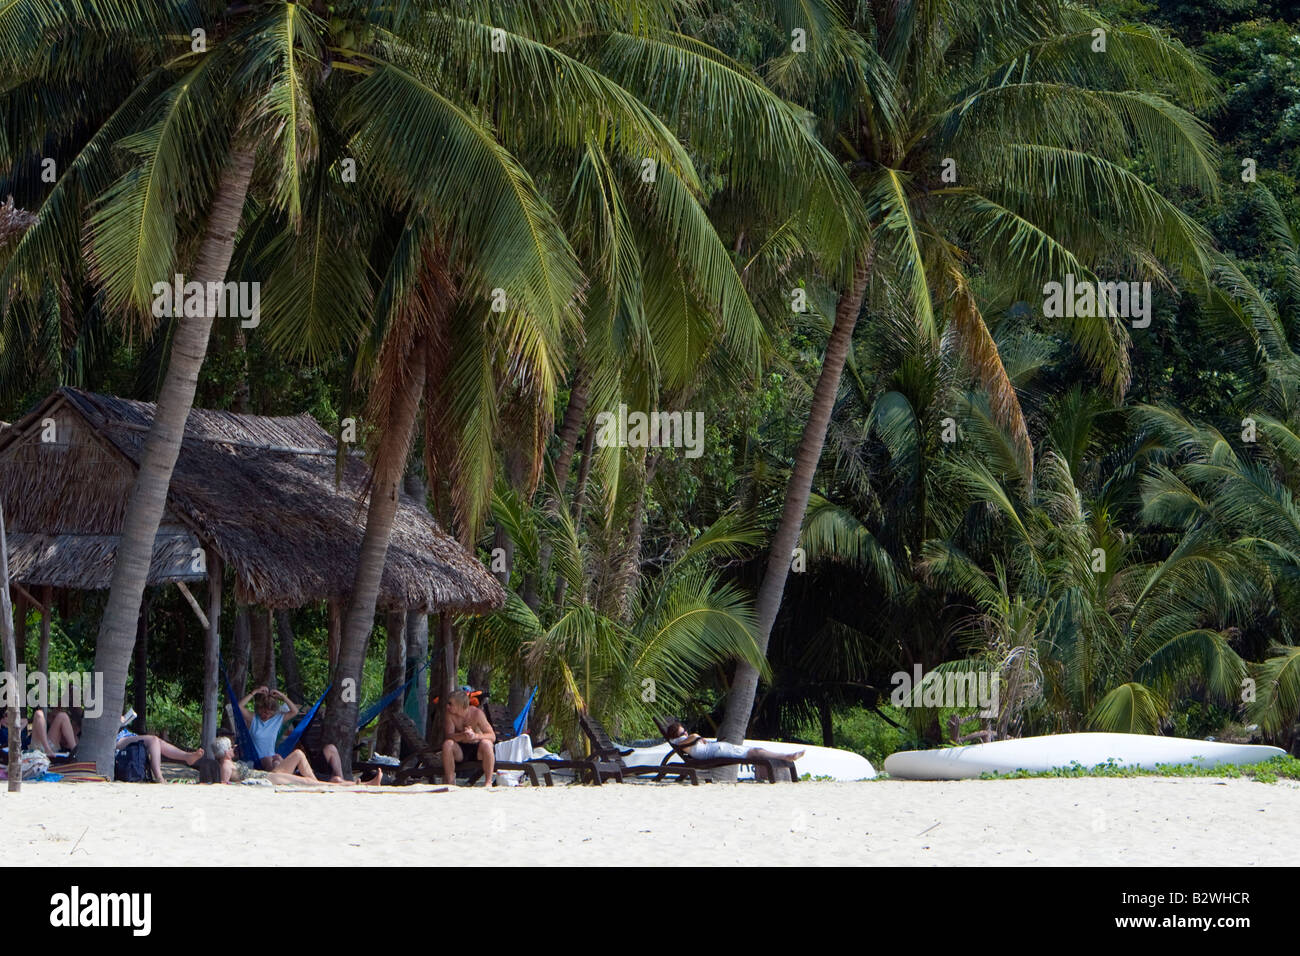 Visitors relax beneath palm trees on white sand beach Cham Island off historic Hoi An Vietnam Stock Photo